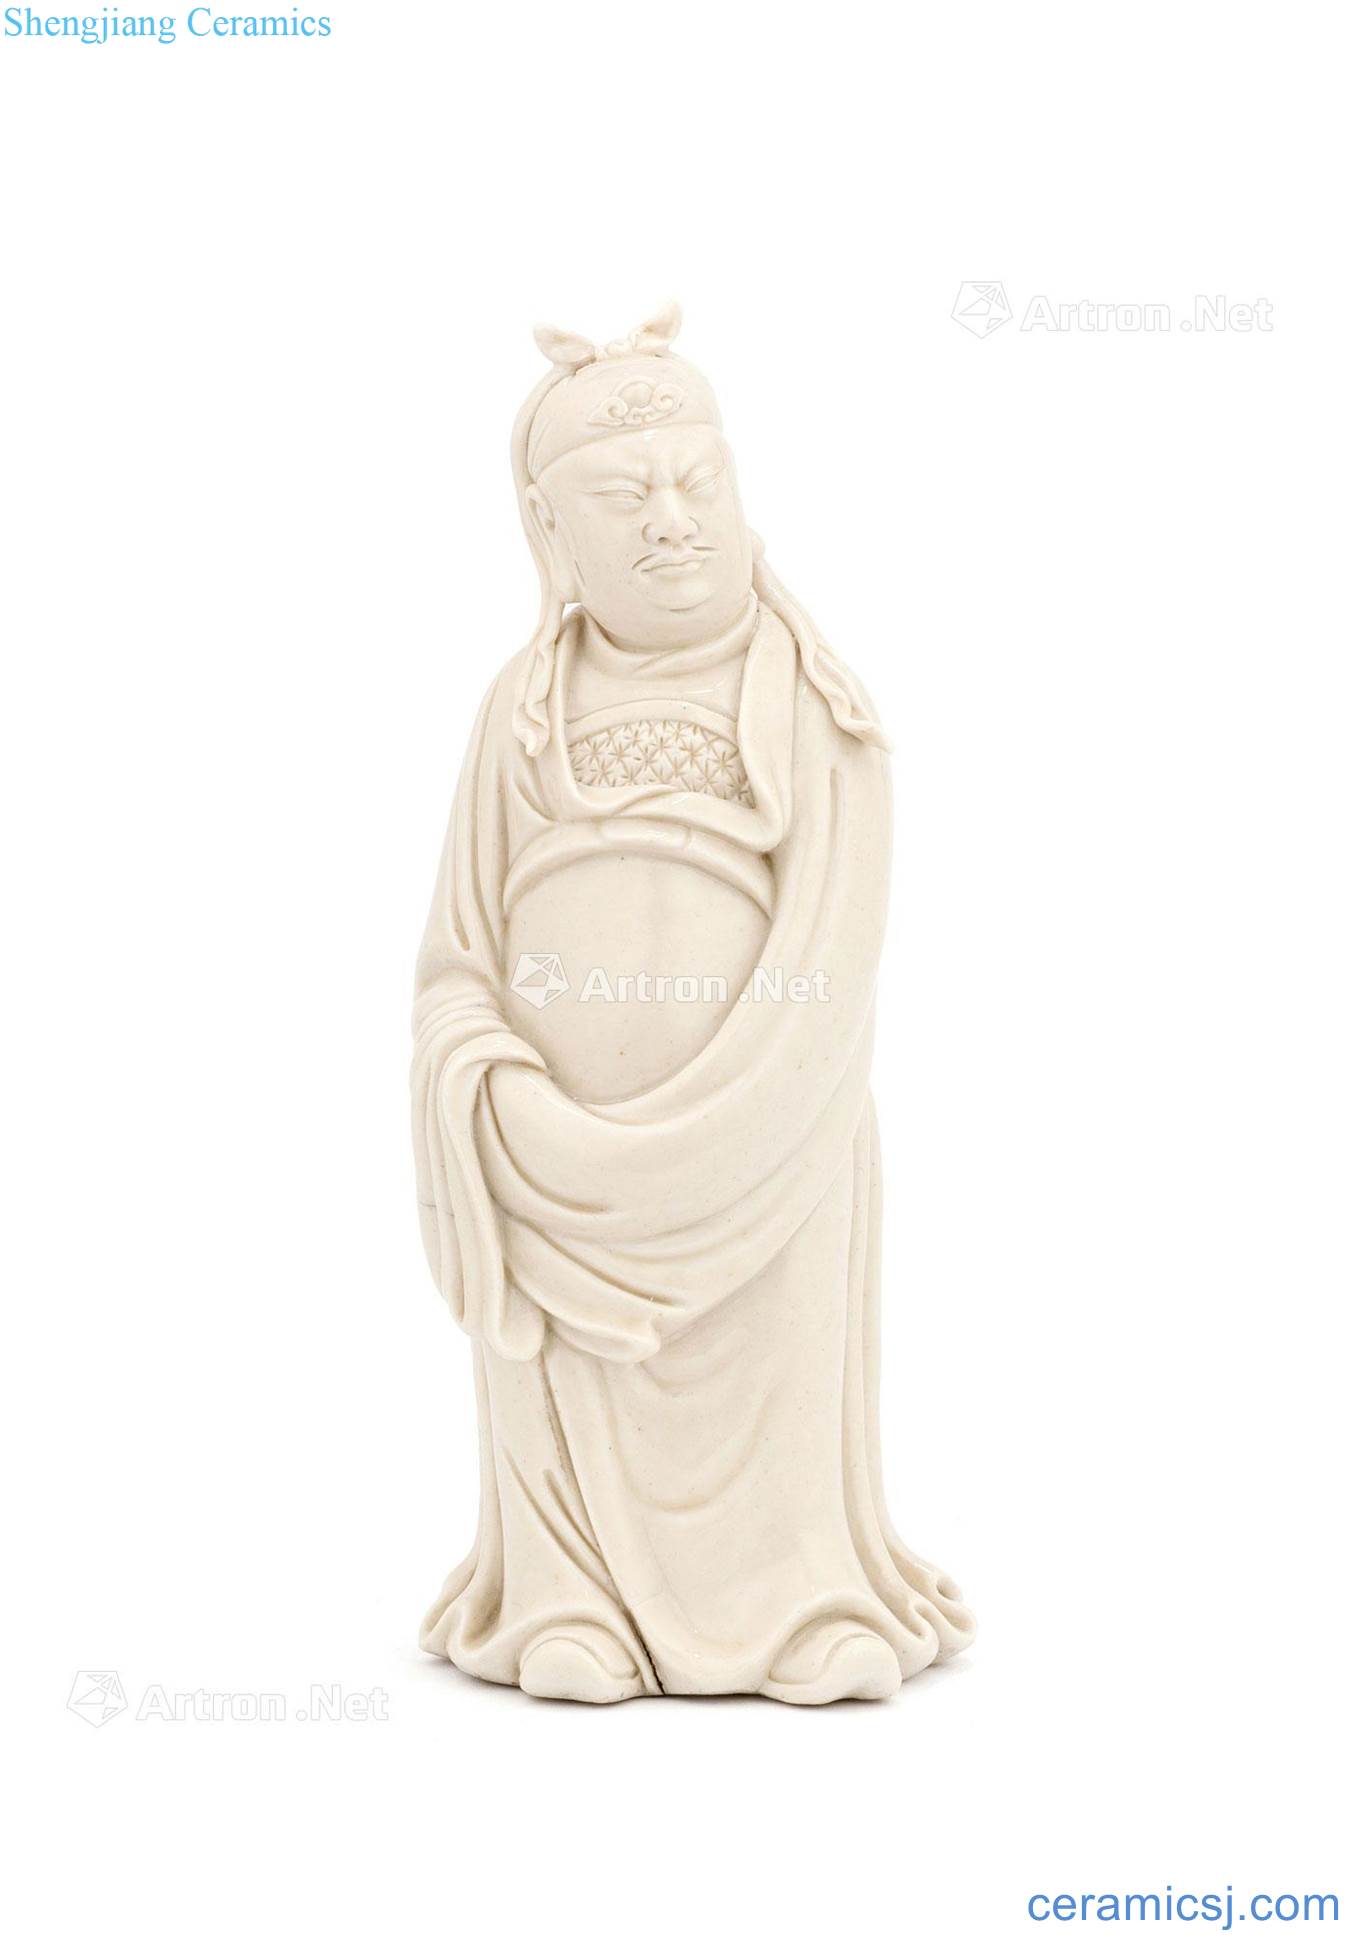 In the 17th century dehua white porcelain emperor stands resemble